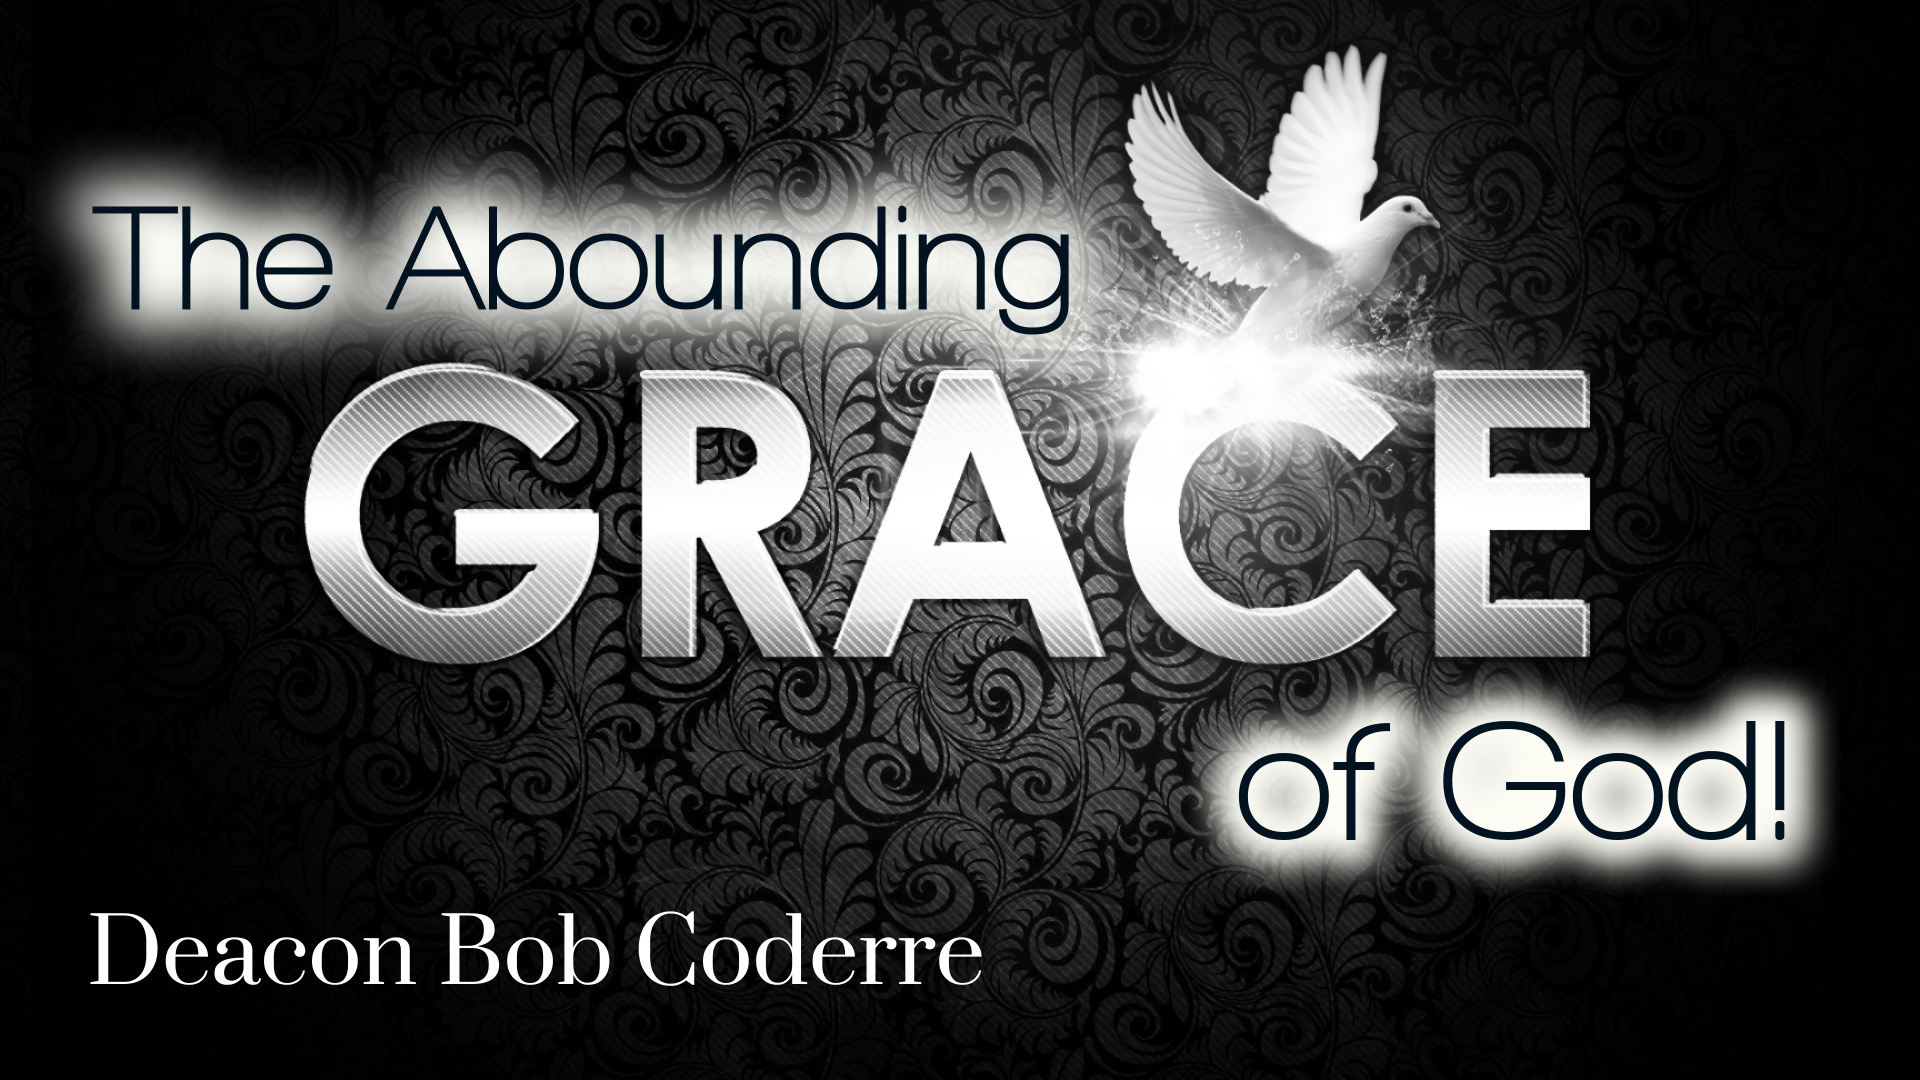 The Abounding Grace of God!